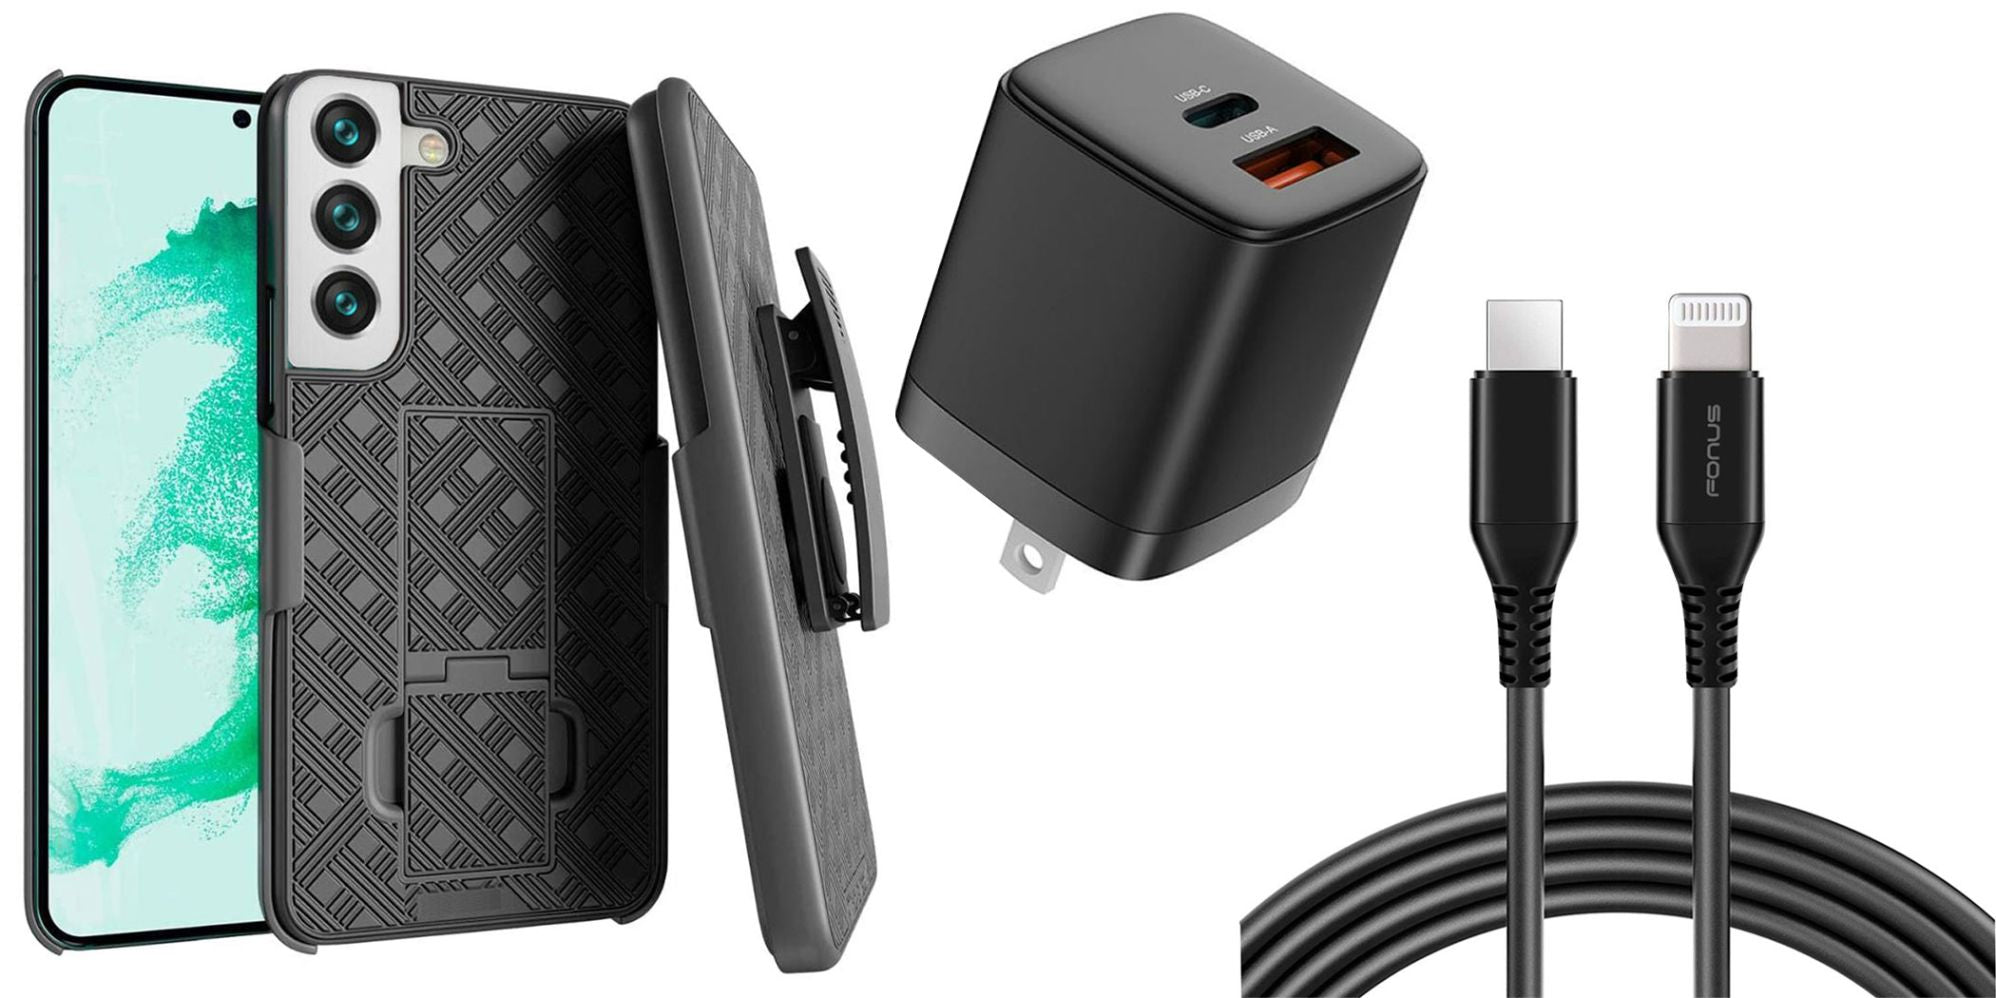 Belt Clip Case and Fast Home Charger Combo, 6ft Long USB-C Cable PD Type-C Power Adapter Swivel Holster - ACZ56+G88